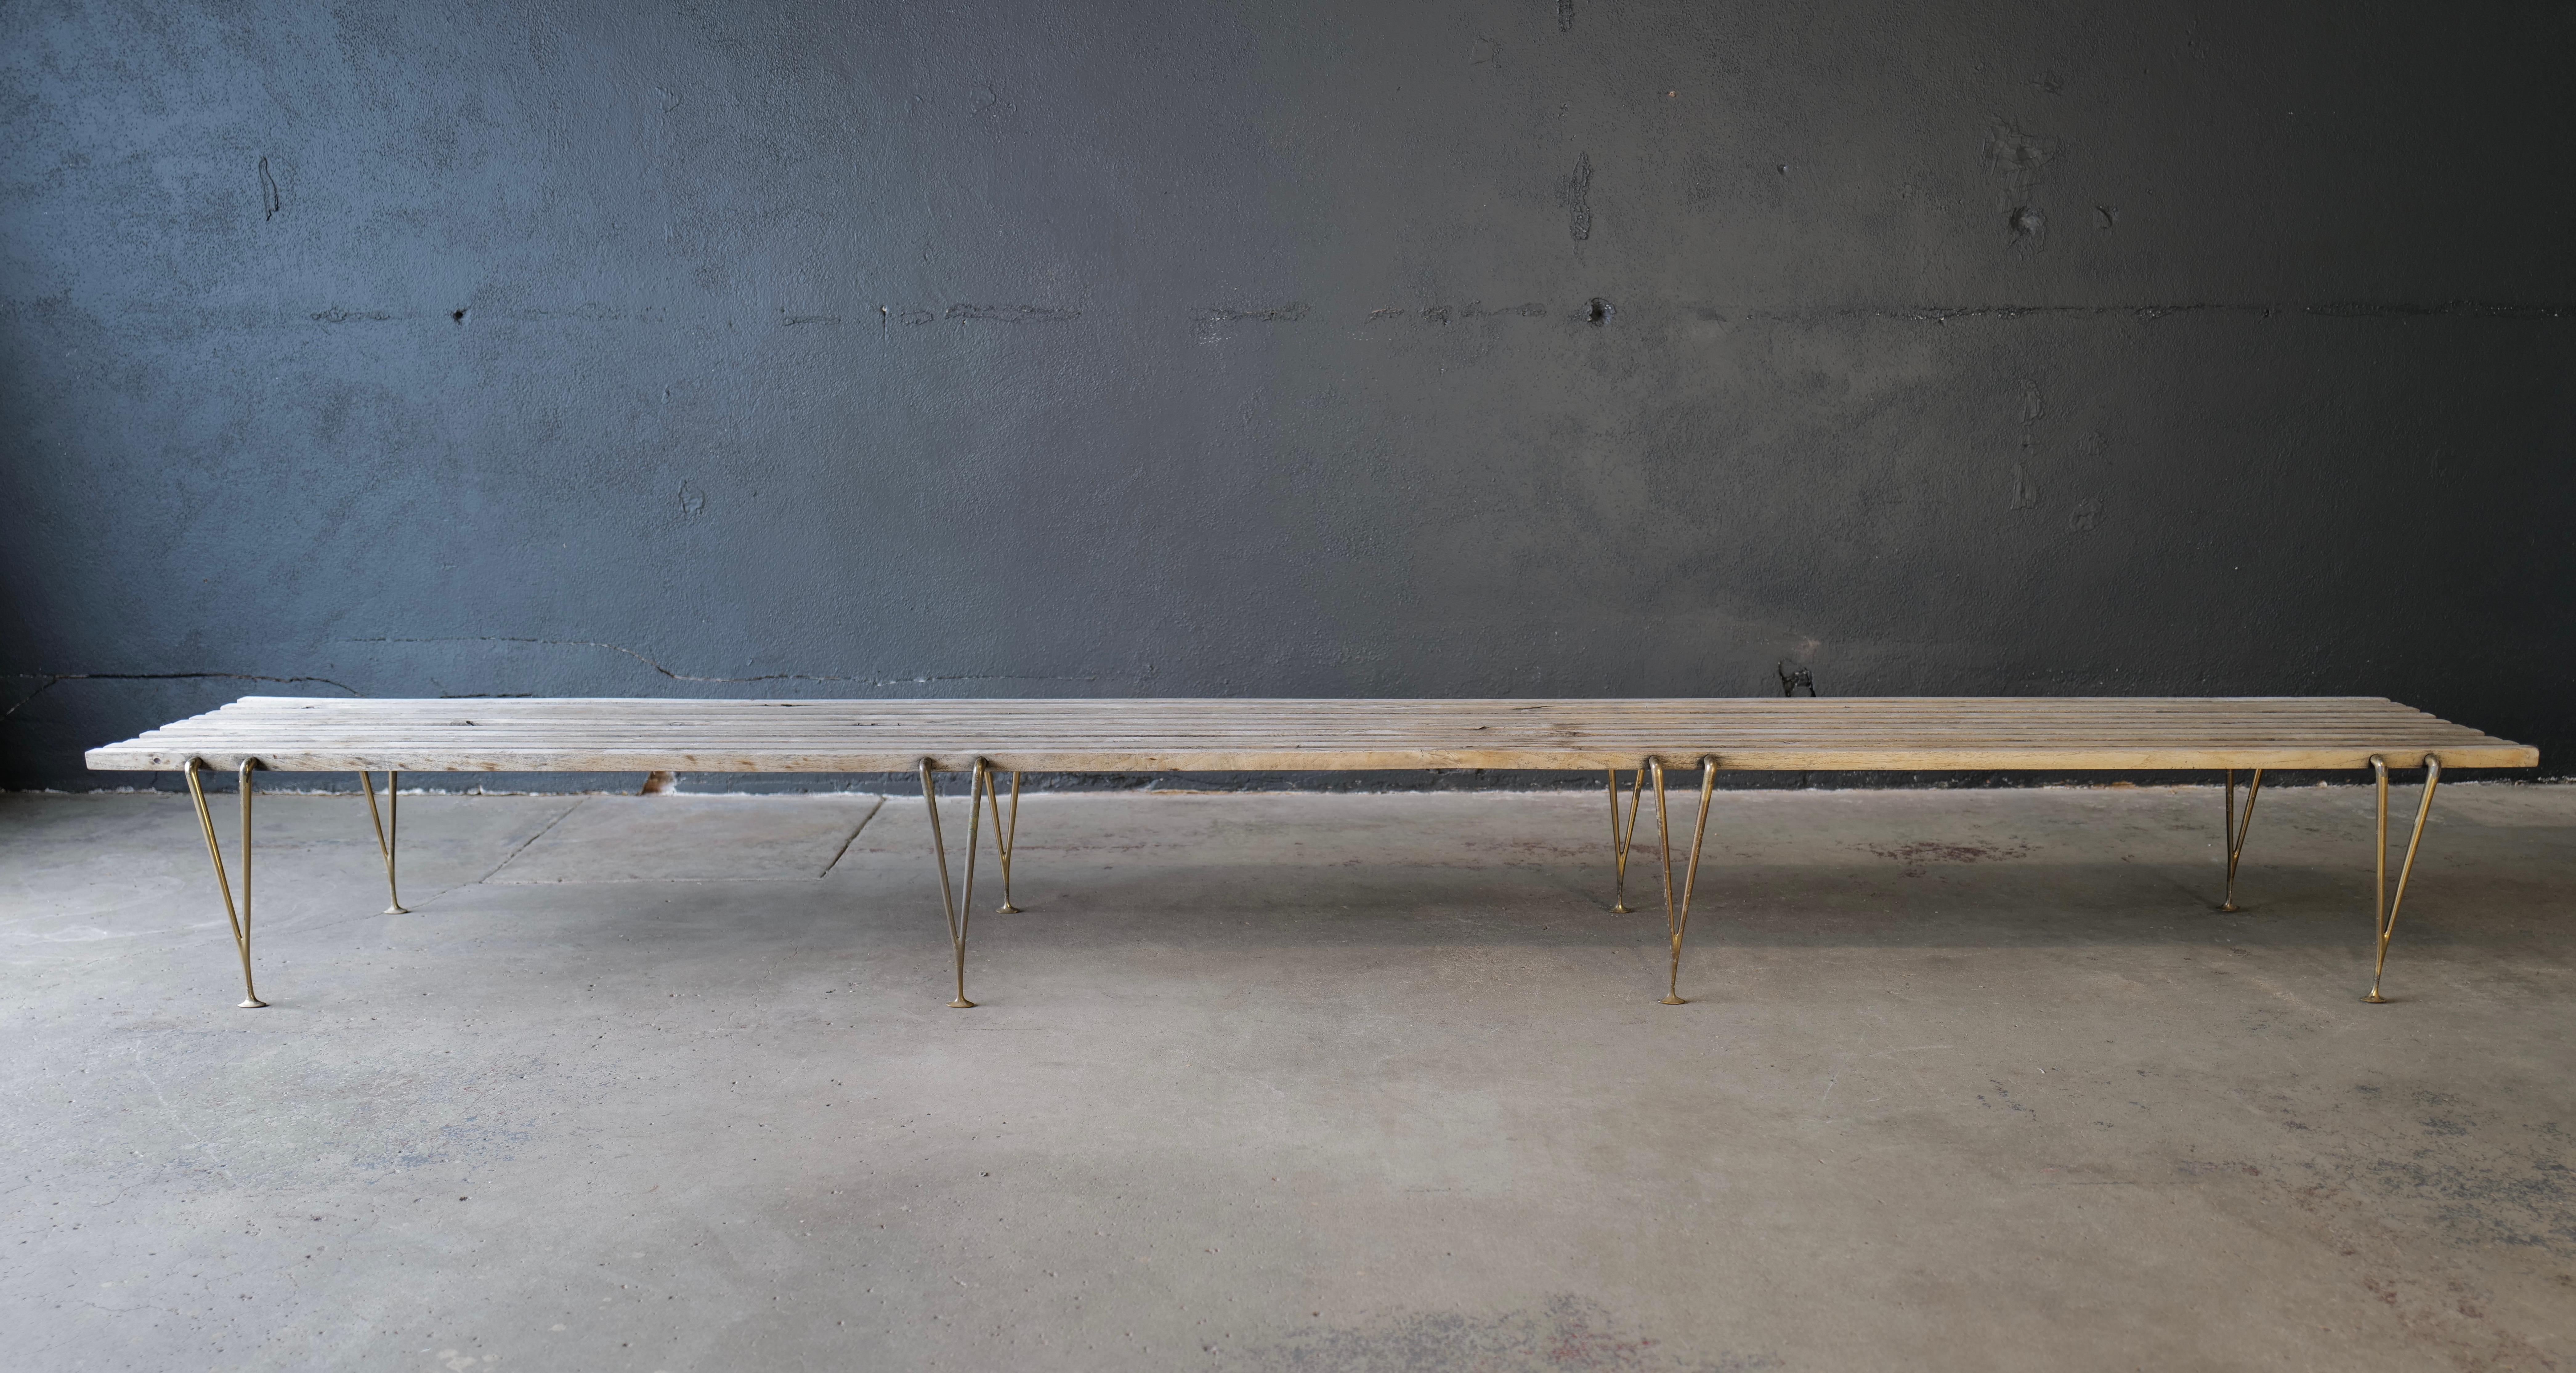 A Hugh Acton 11 foot wood slat bench with brass legs is a stunning and timeless piece of furniture that combines the warmth of wood with the elegance of brass. Designed by renowned American designer Hugh Acton, this bench embodies a harmonious